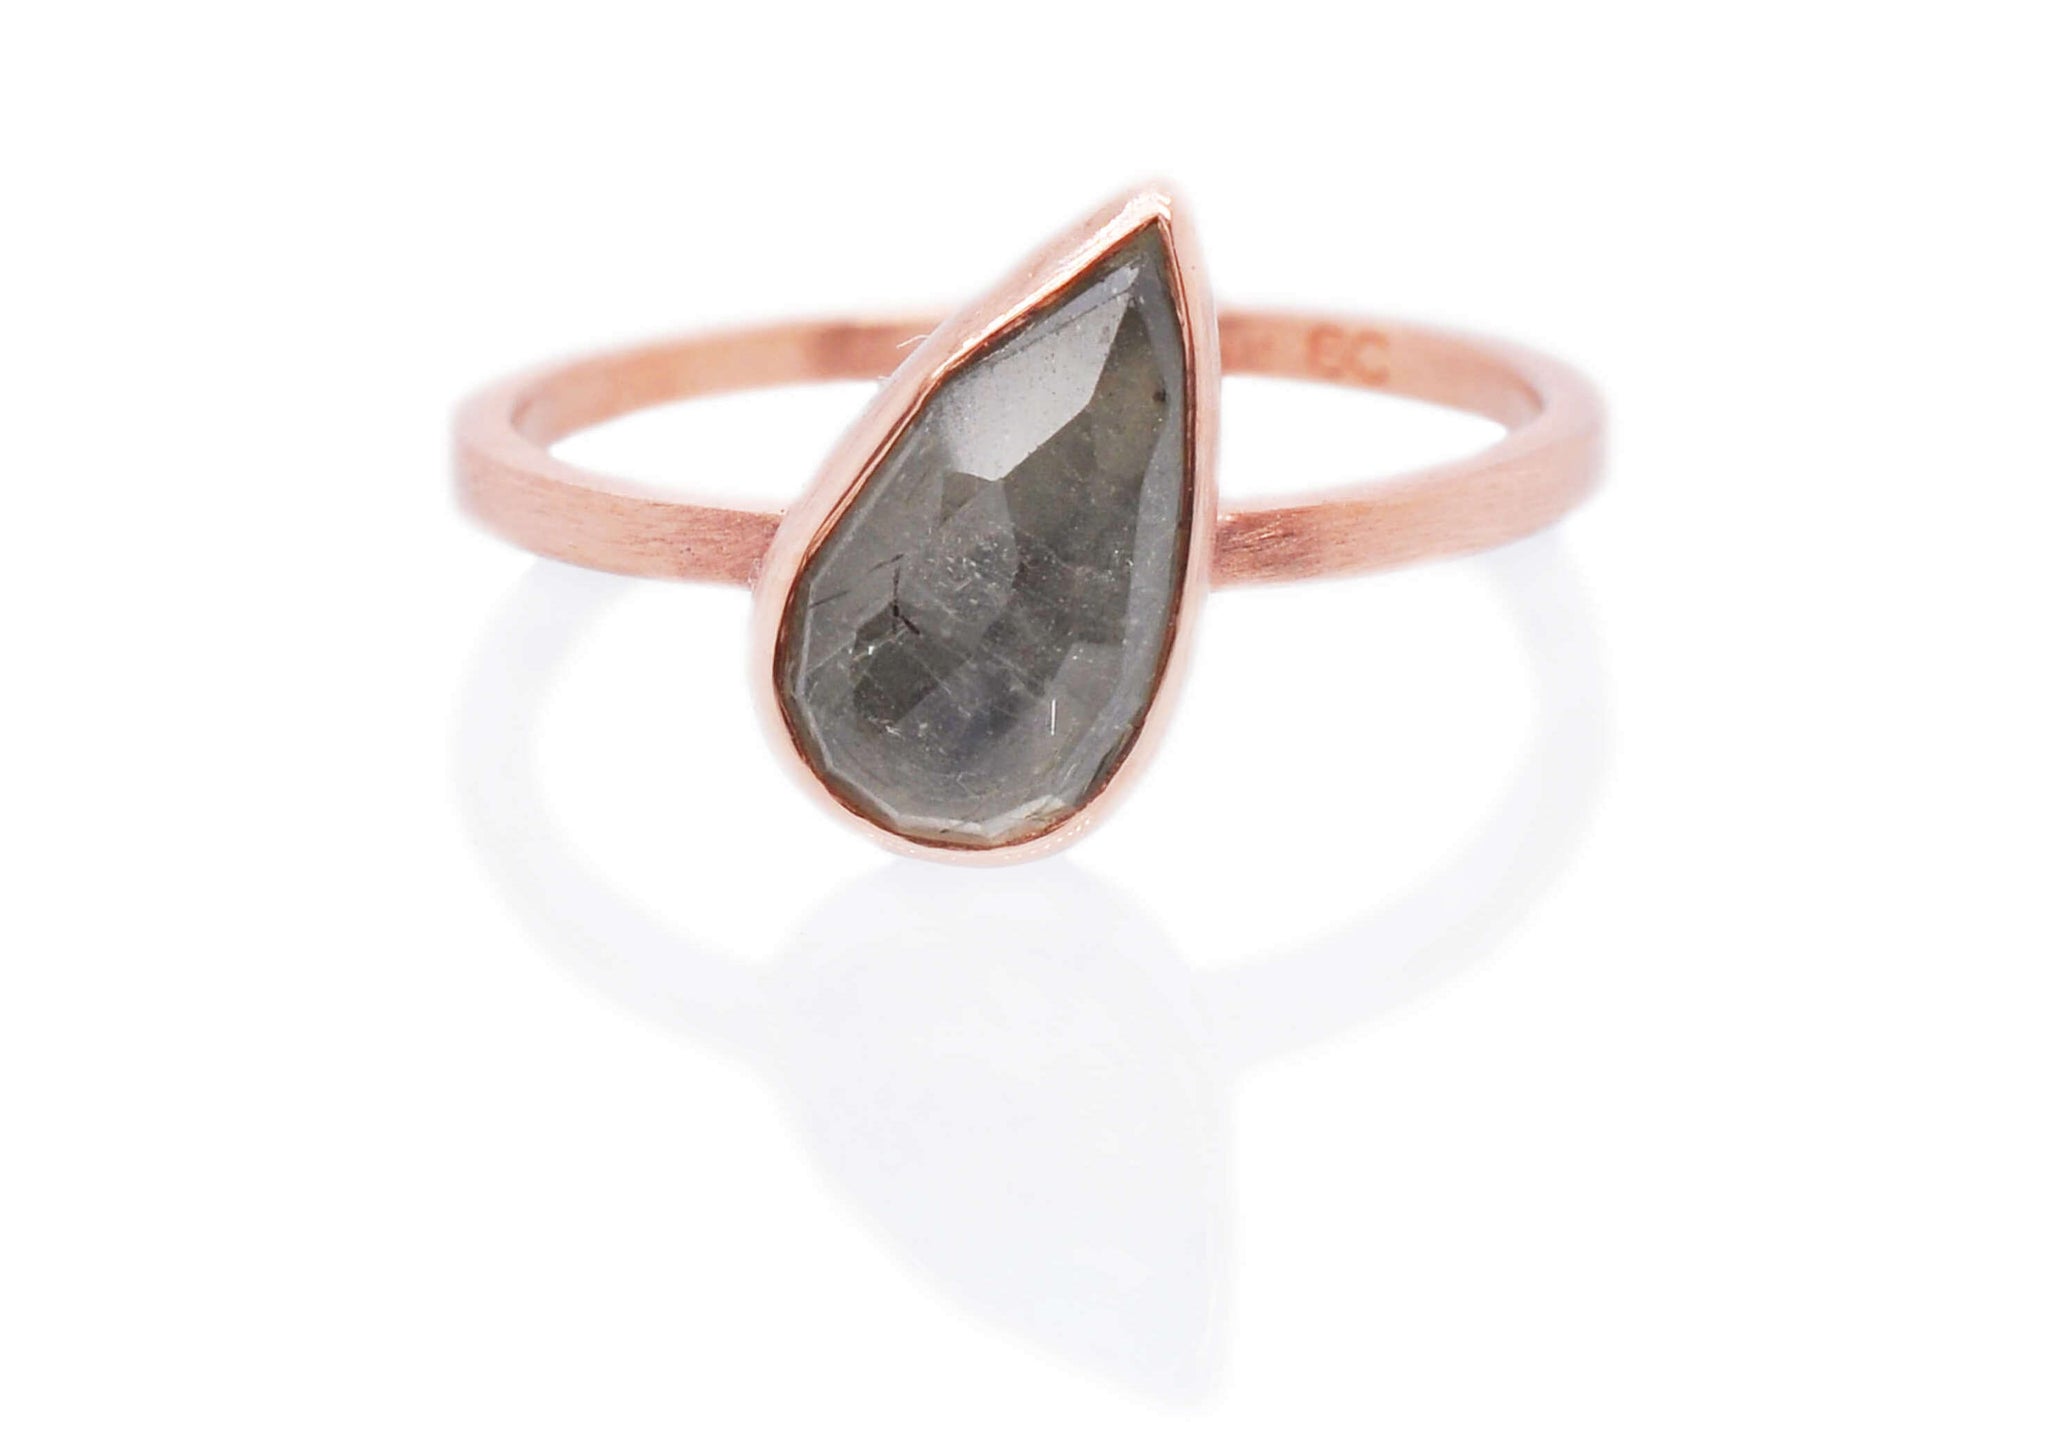 Handmade sapphire engagement ring in rose gold.